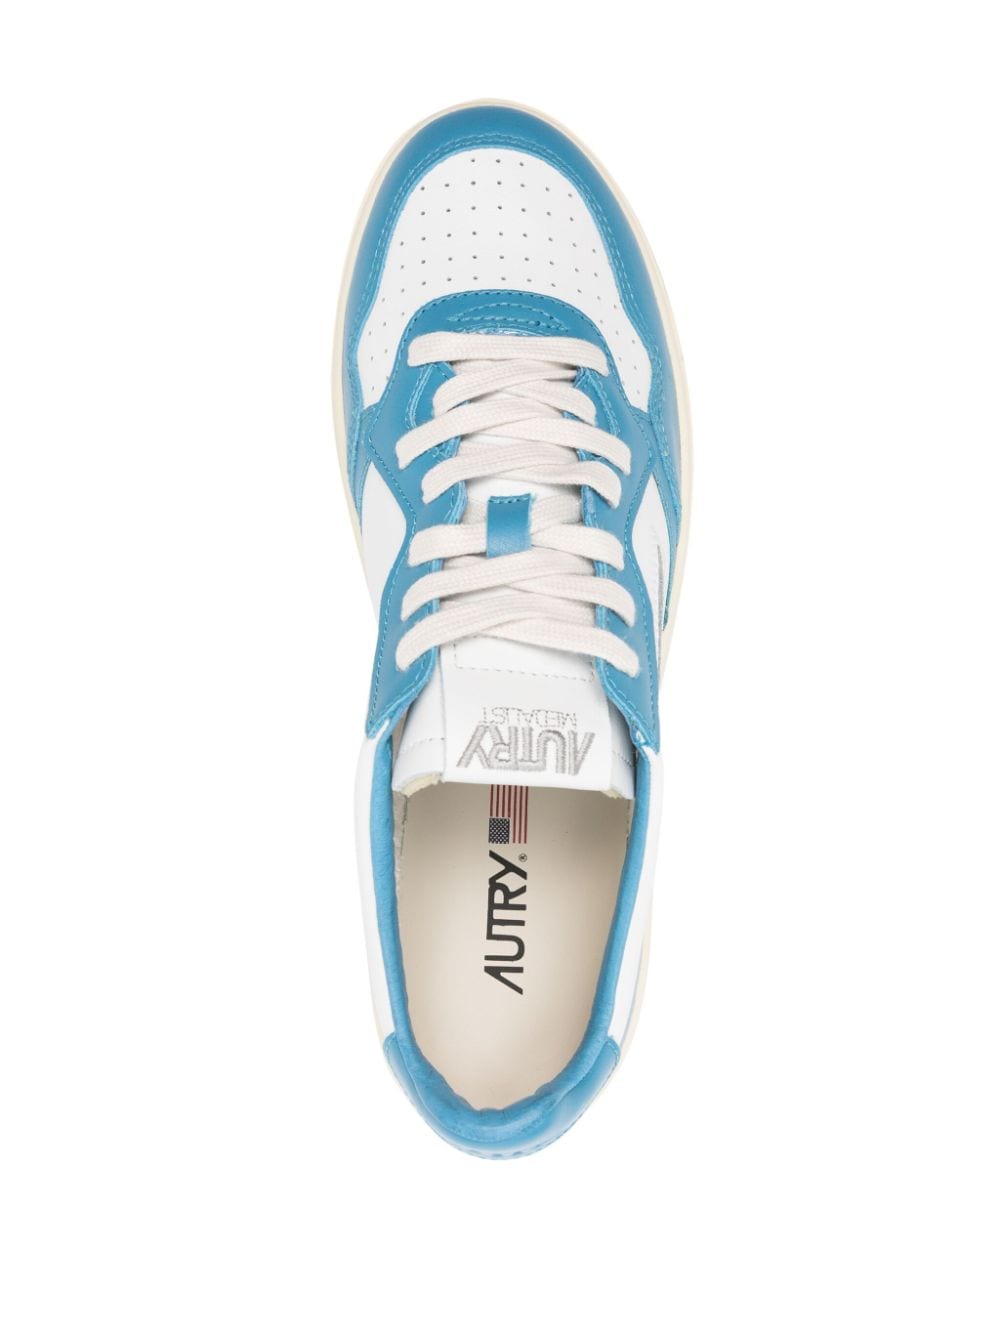 White and light blue leather sneakers